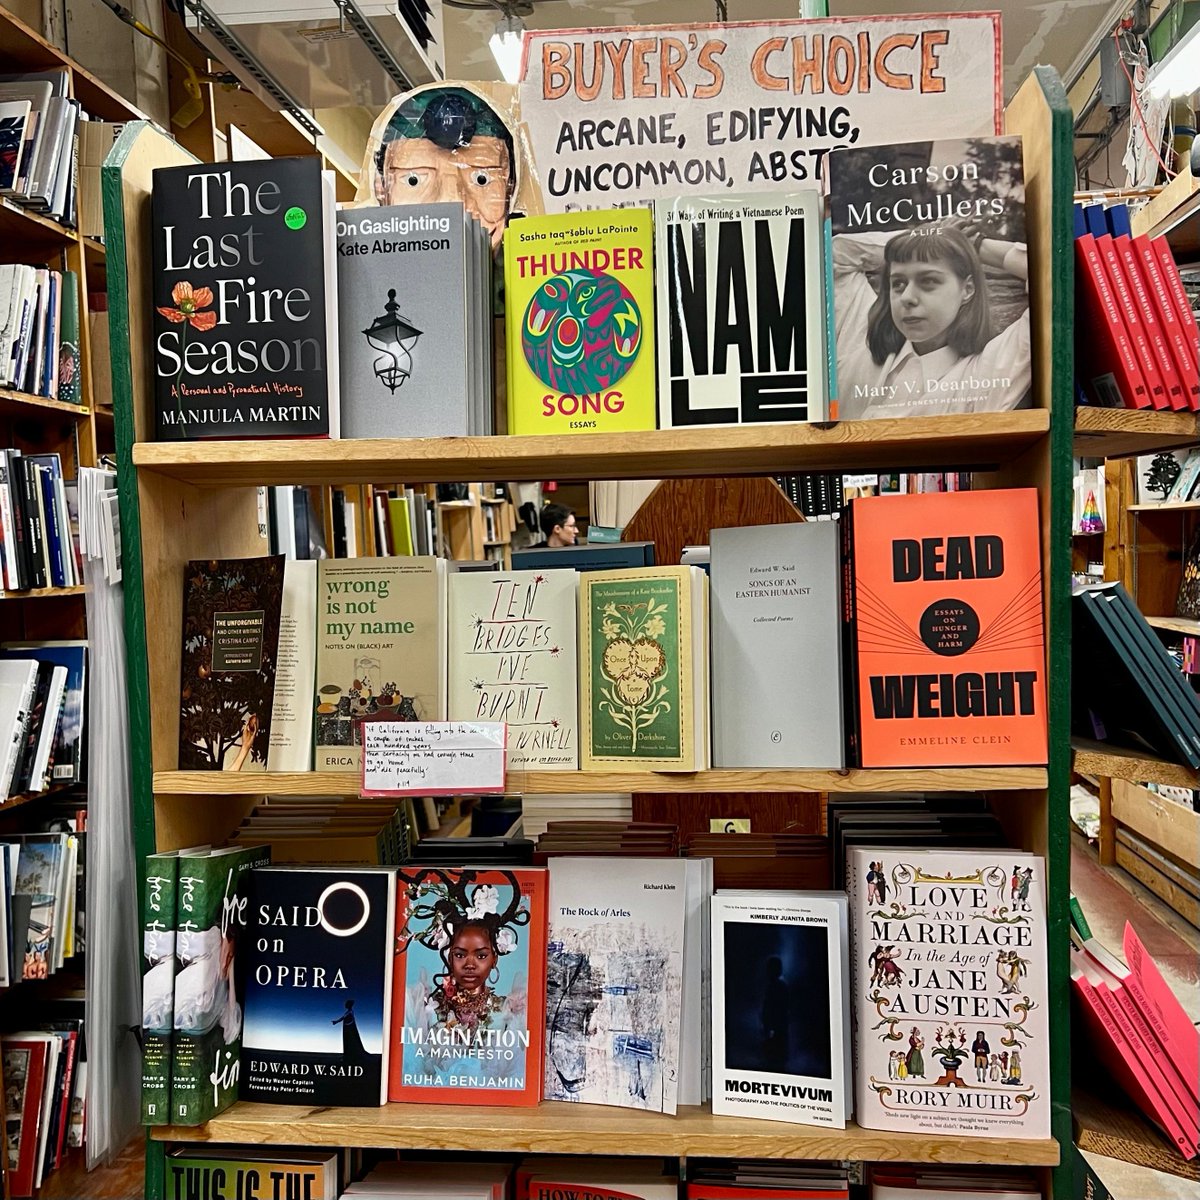 Don't miss our buyer's choice display for some unique and esoteric reads 🍏 ✨